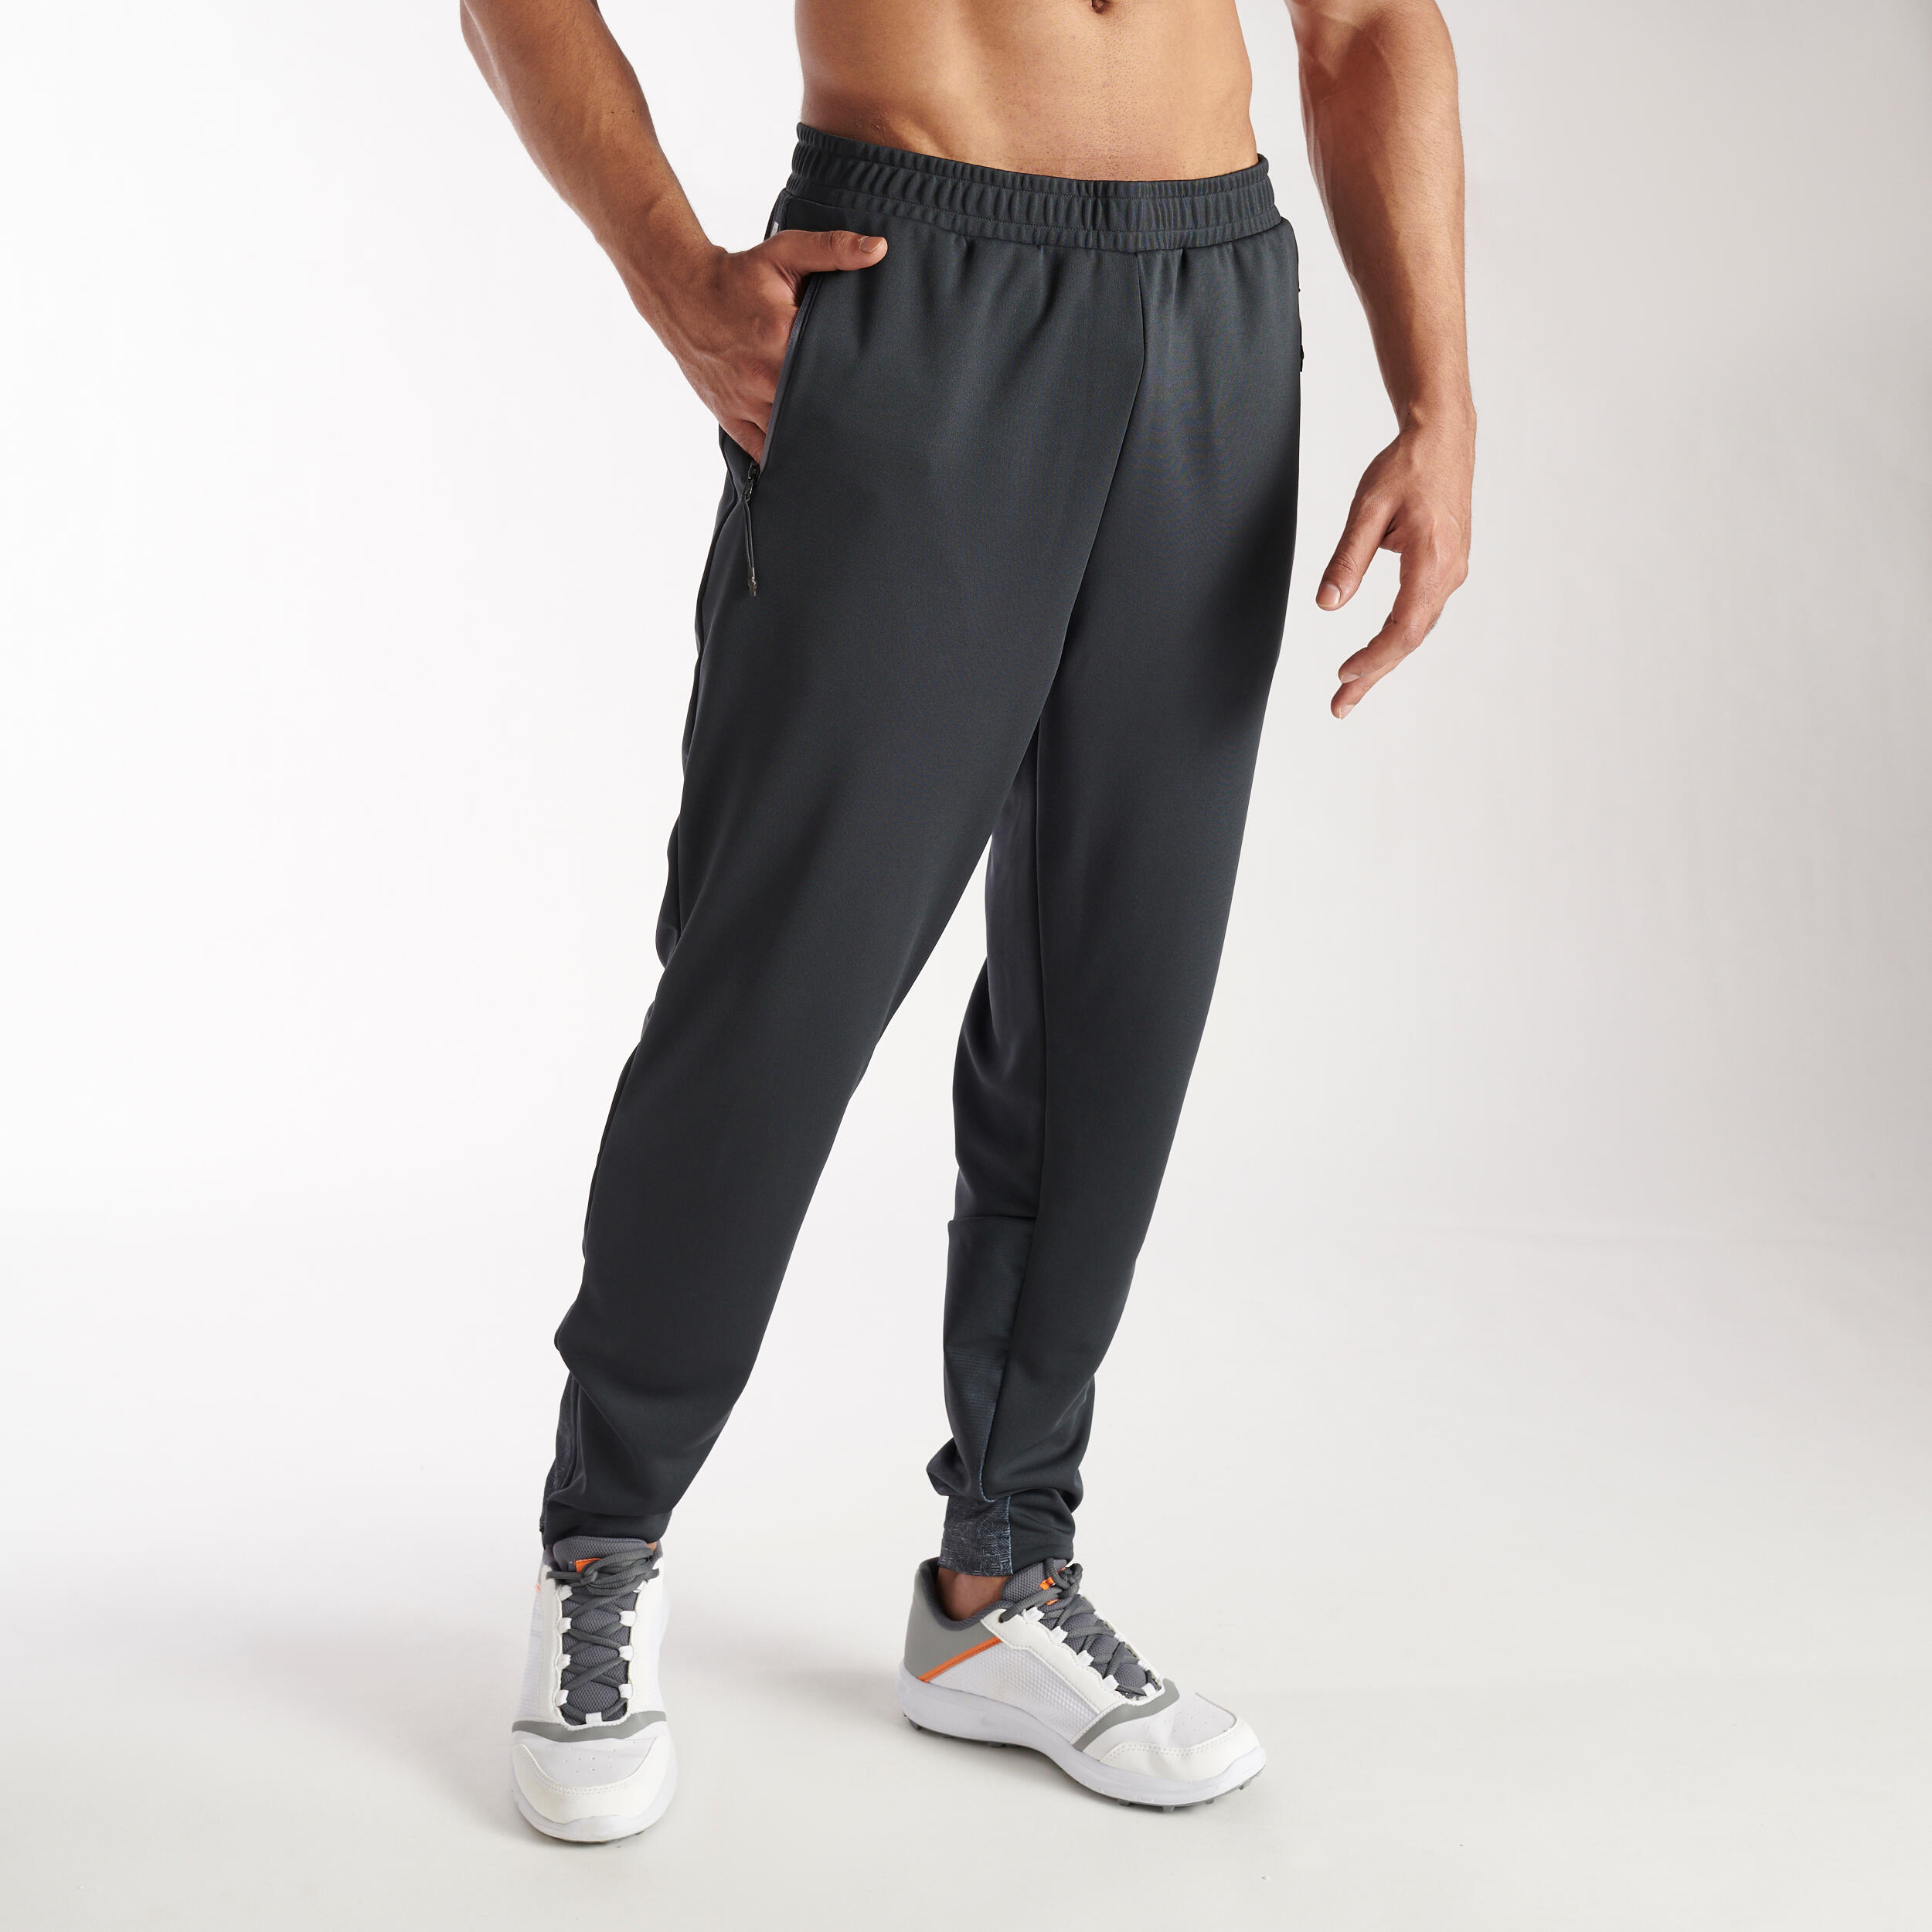 FLX by Decathlon Solid Men White Track Pants - Buy FLX by Decathlon Solid  Men White Track Pants Online at Best Prices in India | Flipkart.com